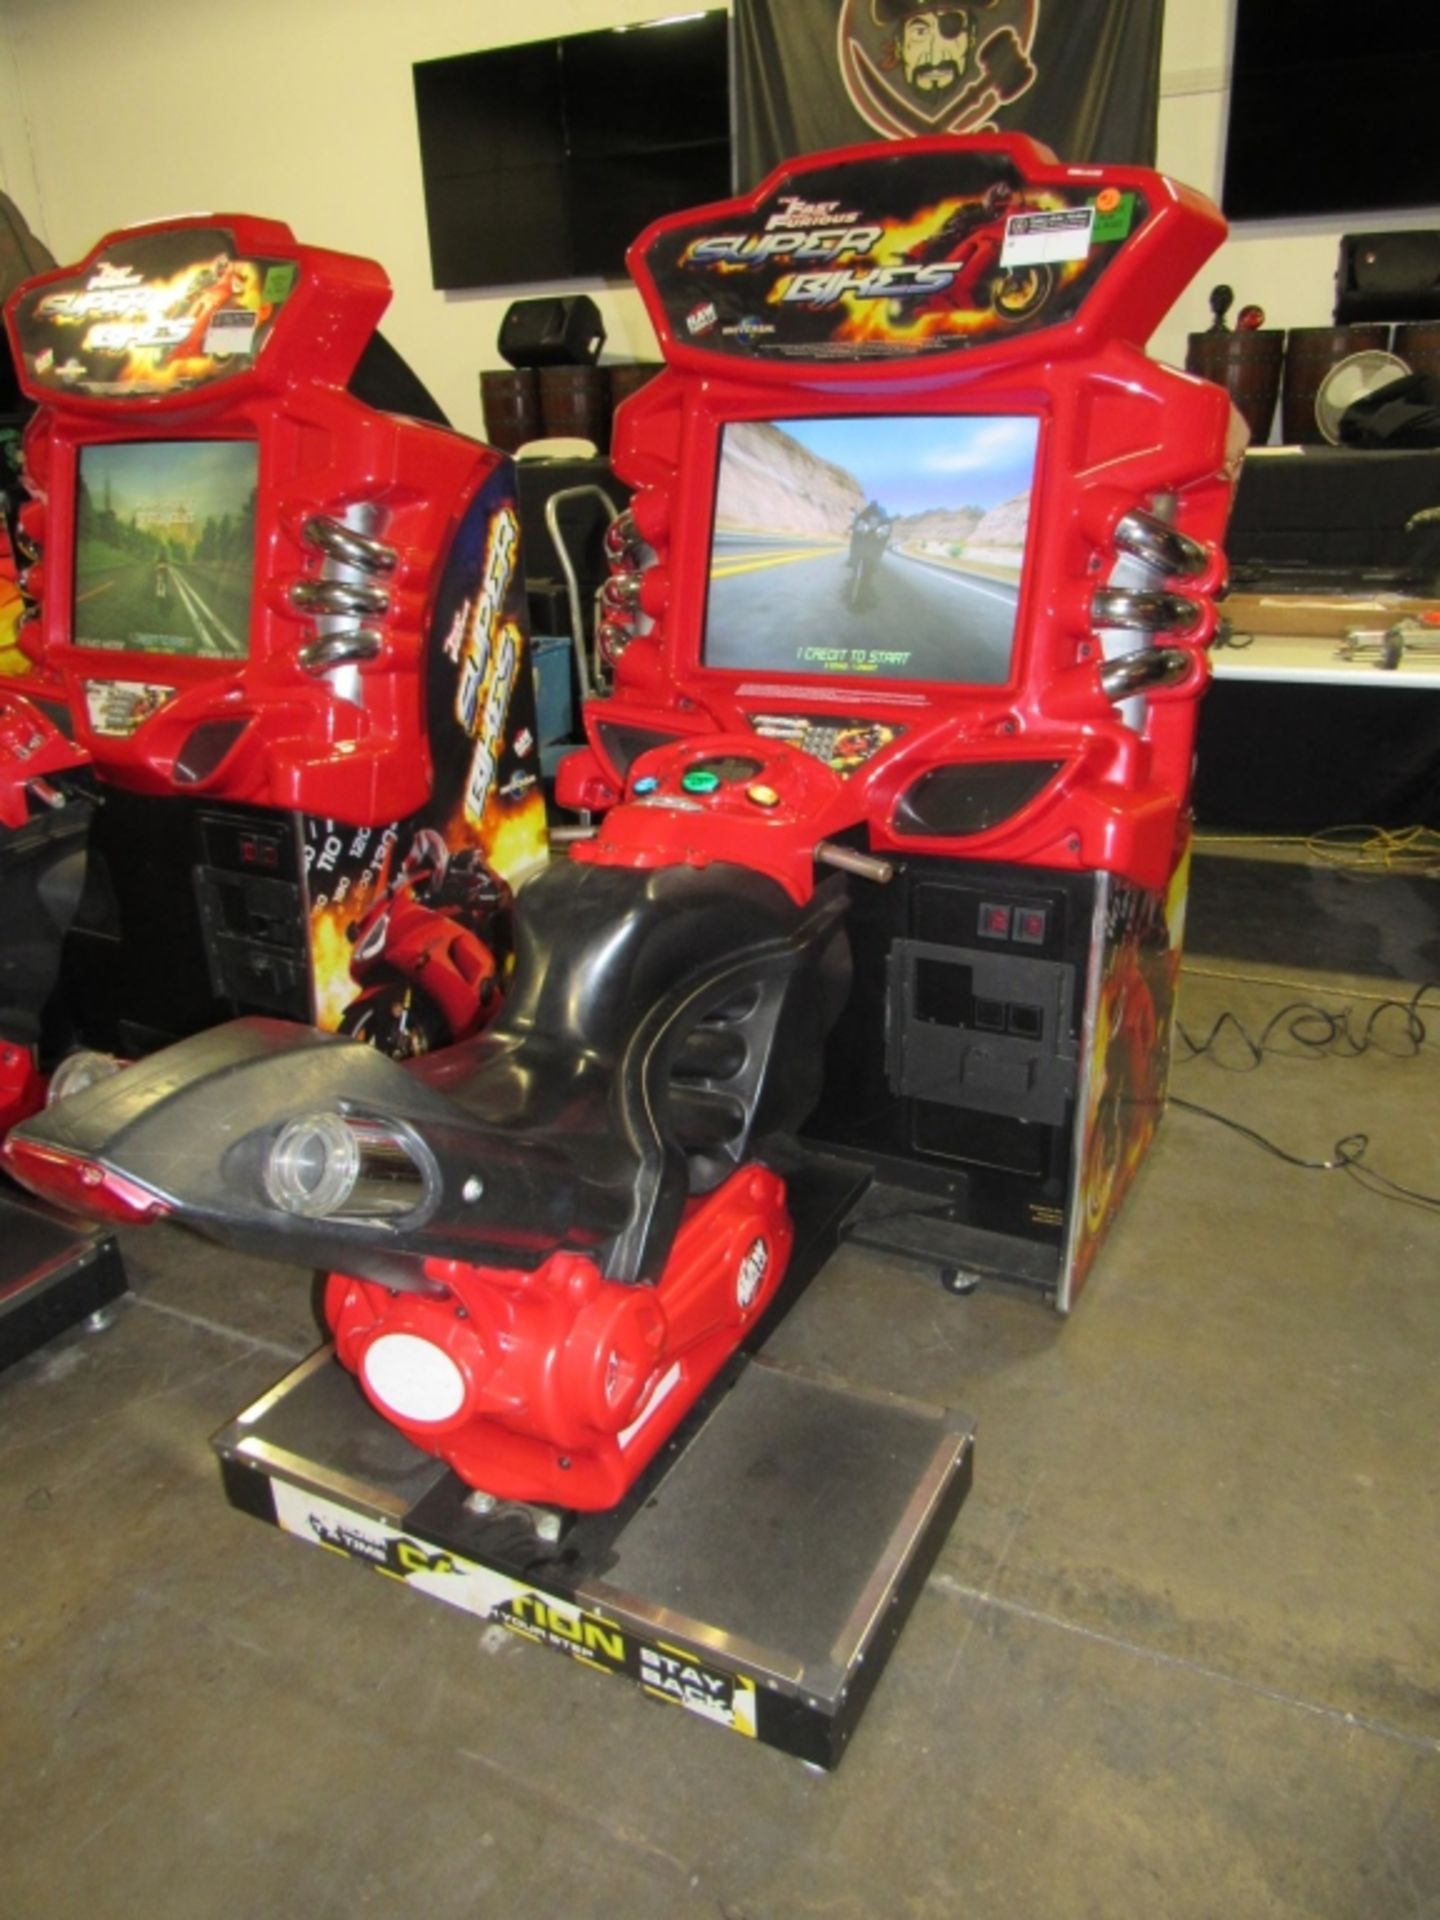 SUPER BIKES FAST & FURIOUS RED RACING ARCADE #1 - Image 5 of 6